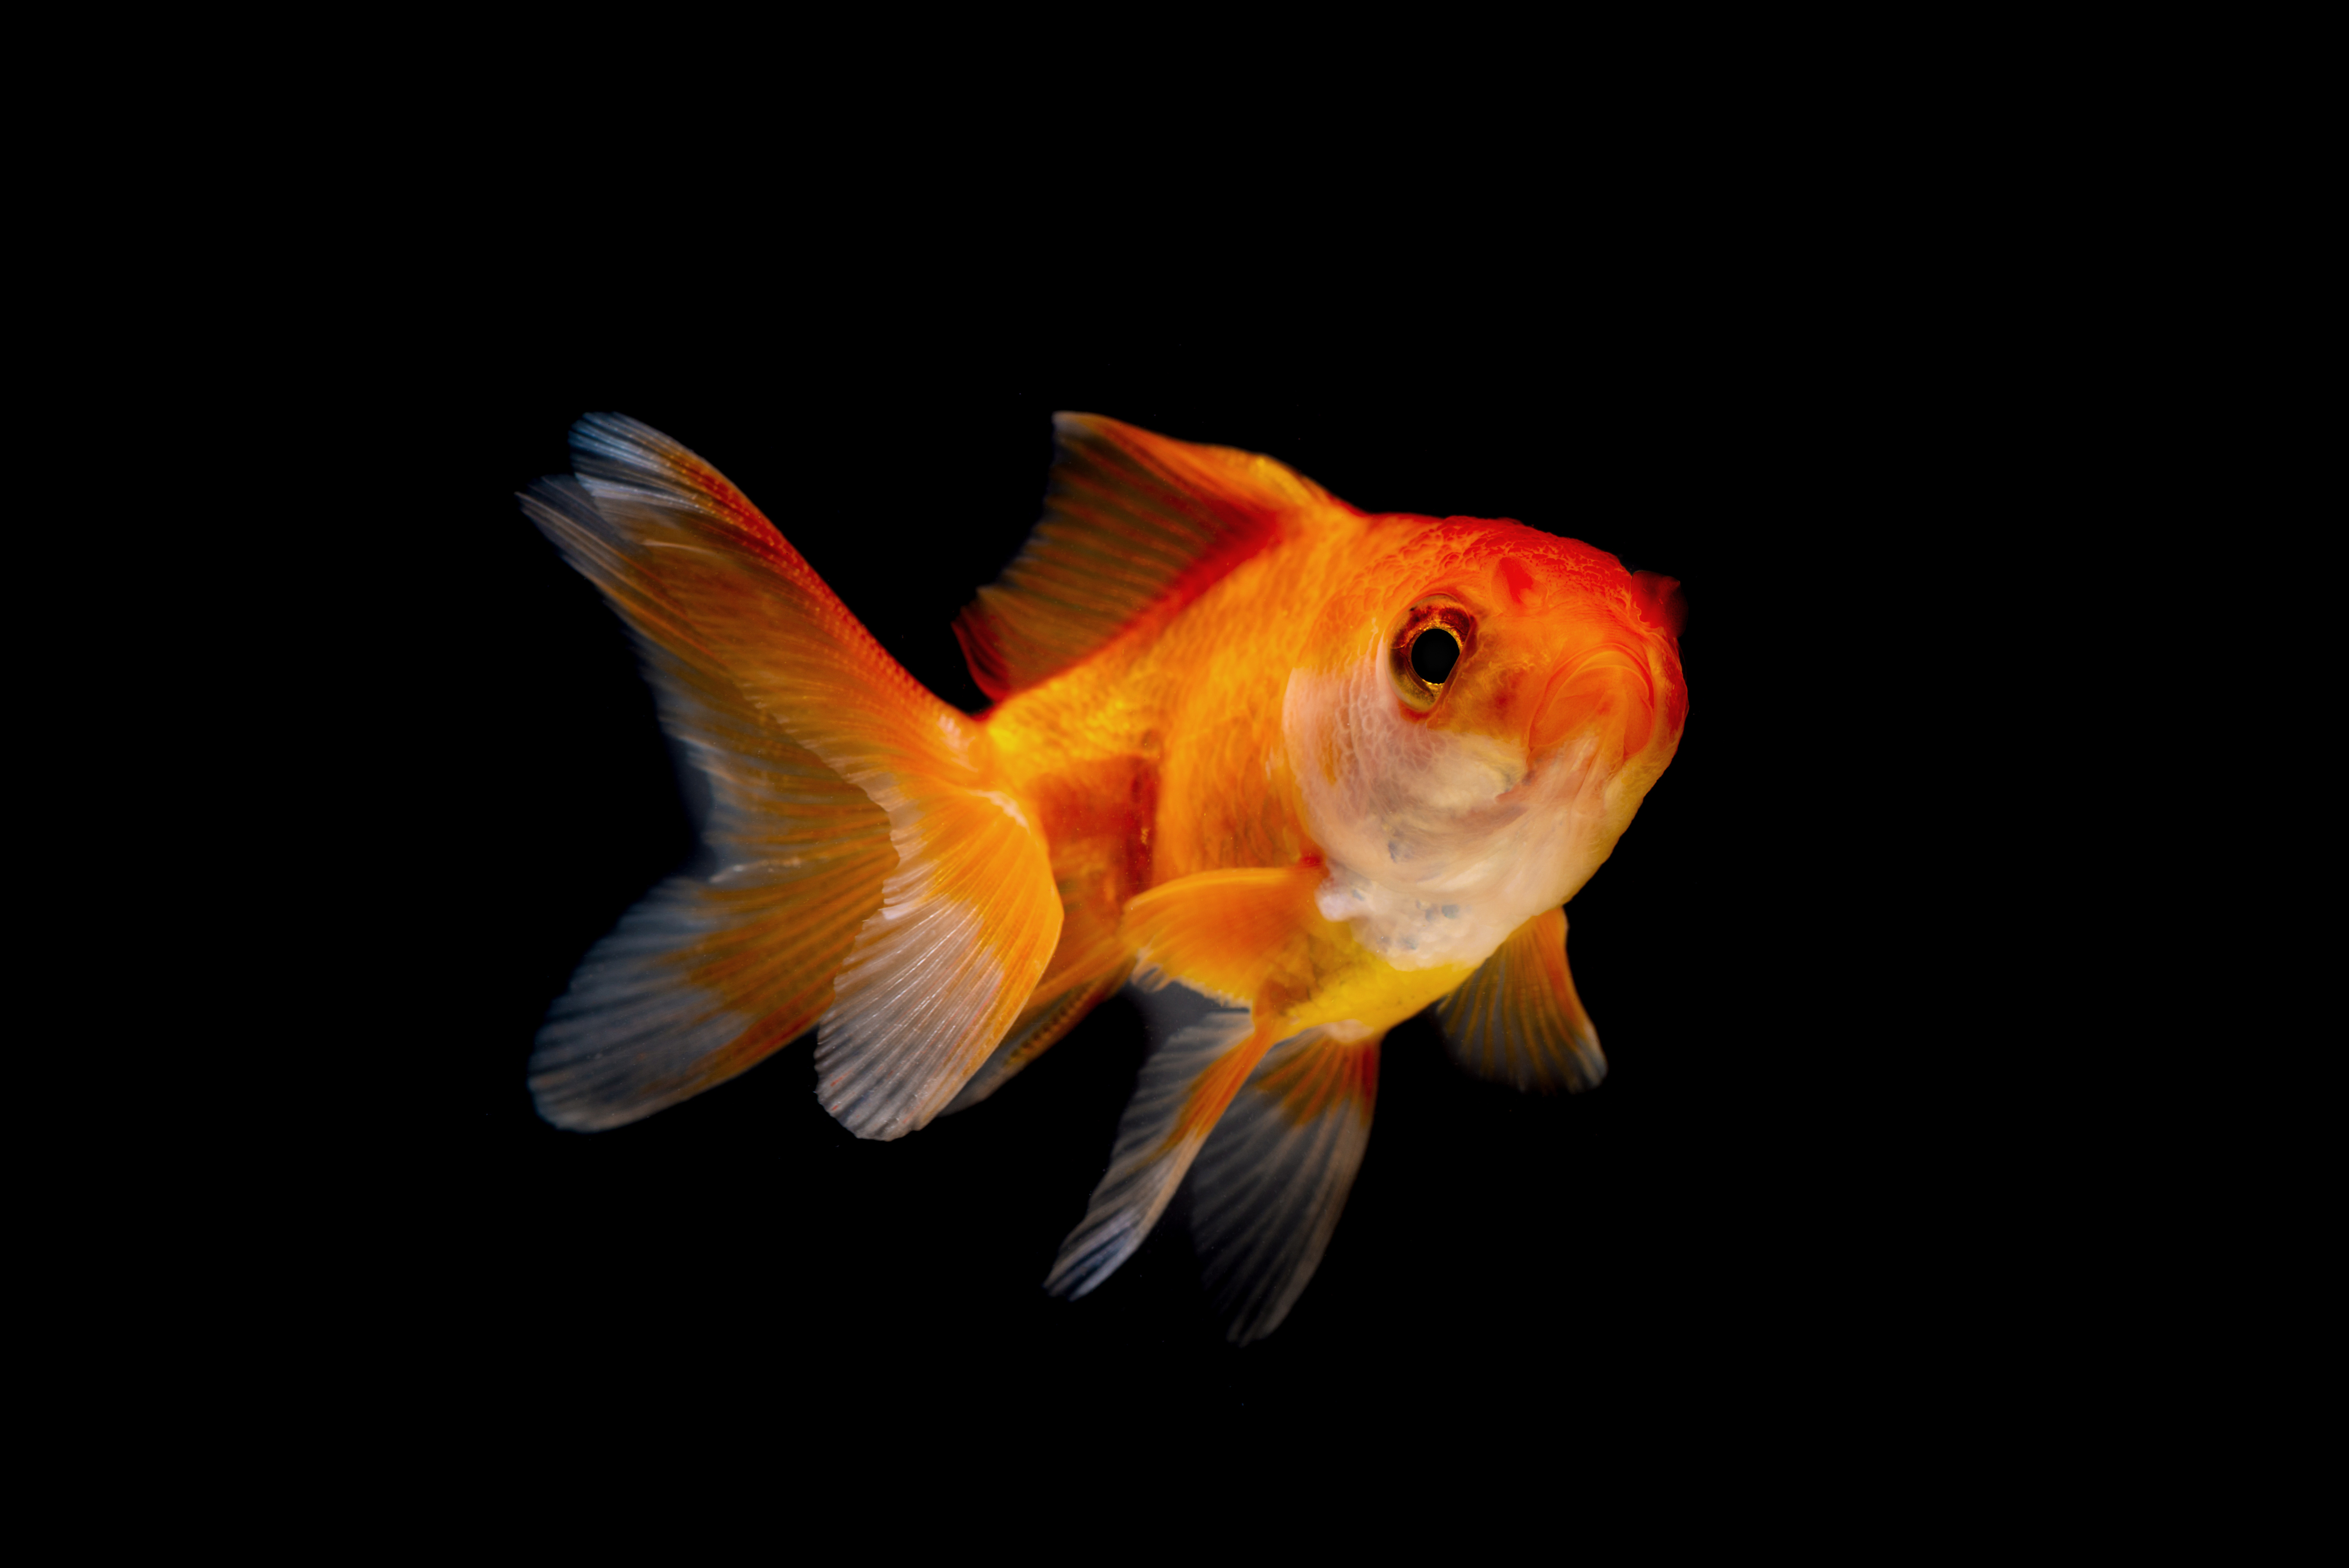 A goldfish partly turned towards the camera on a black background. It seems to be looking directly into the camera lense.